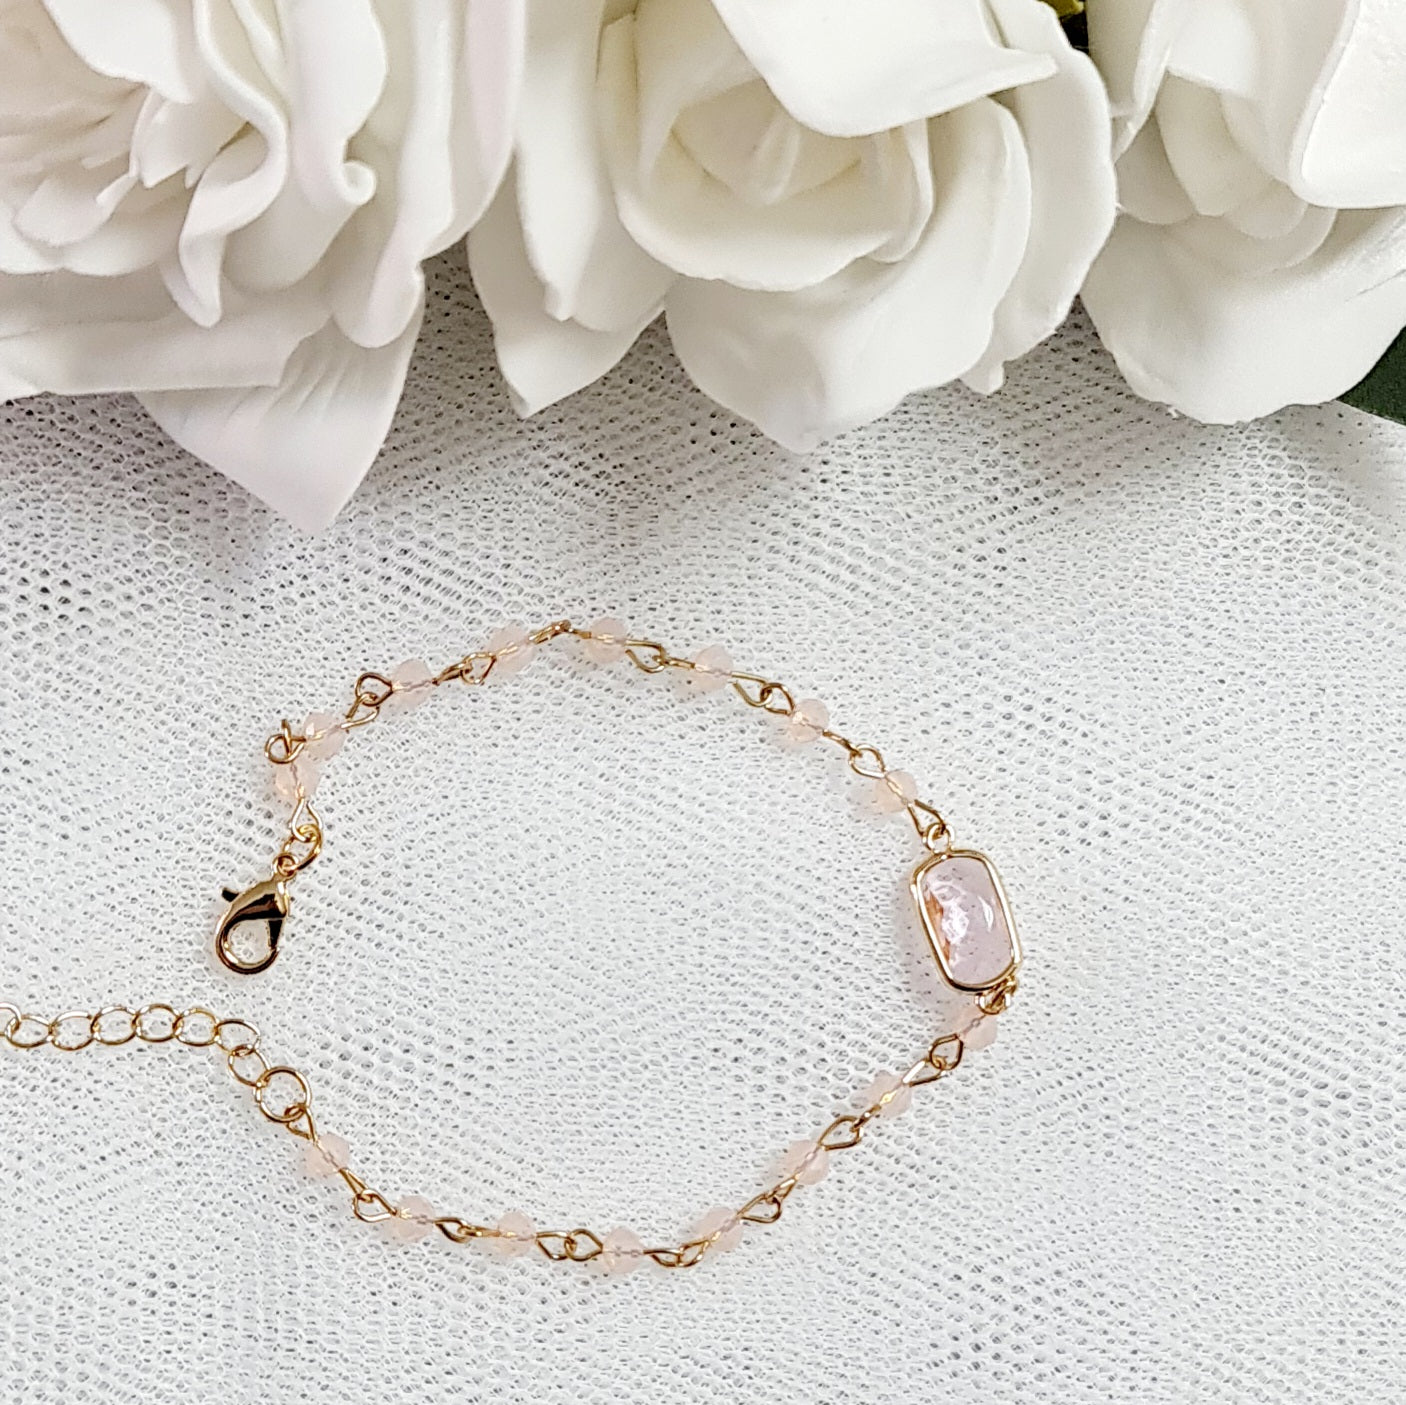 Crystal Clasp Bracelet - Gold and Pink